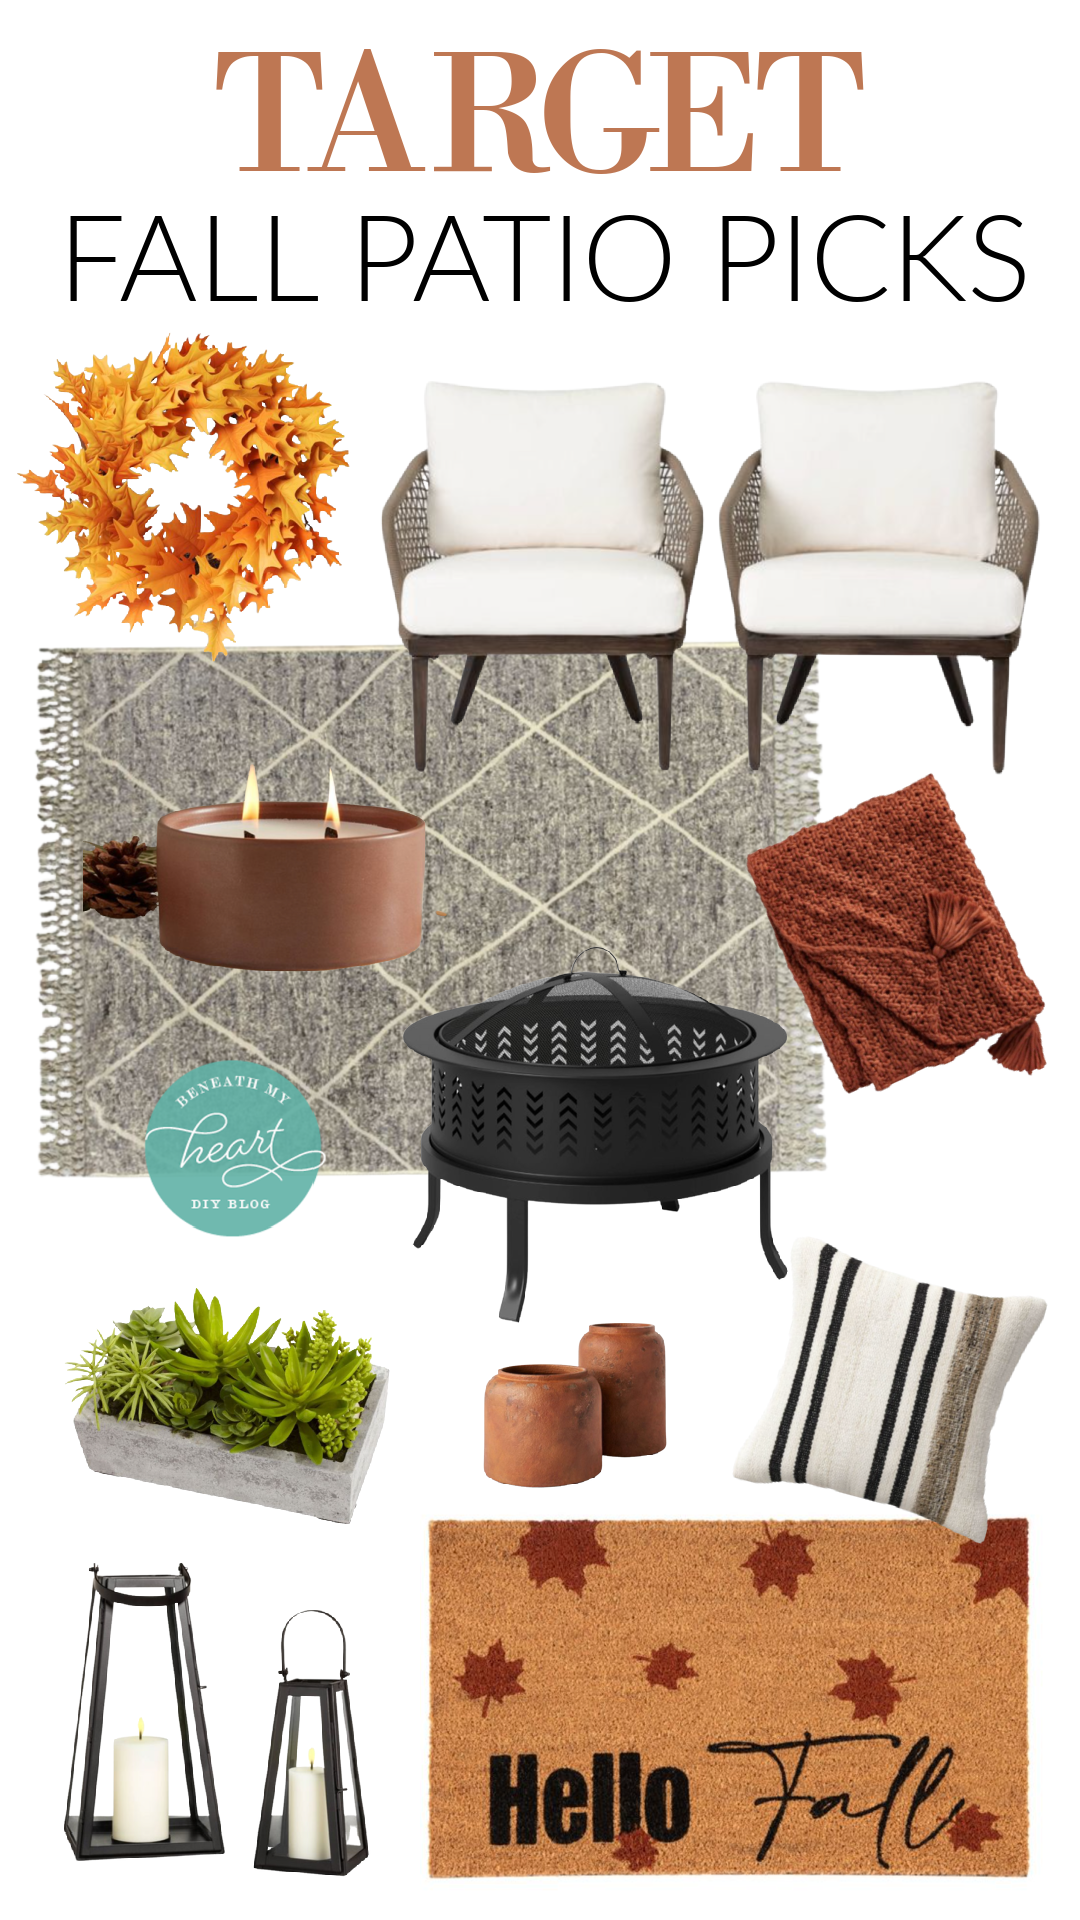 TARGET FALL PATIO PICKS! (And Sneak Peek of our New Patio Area!)